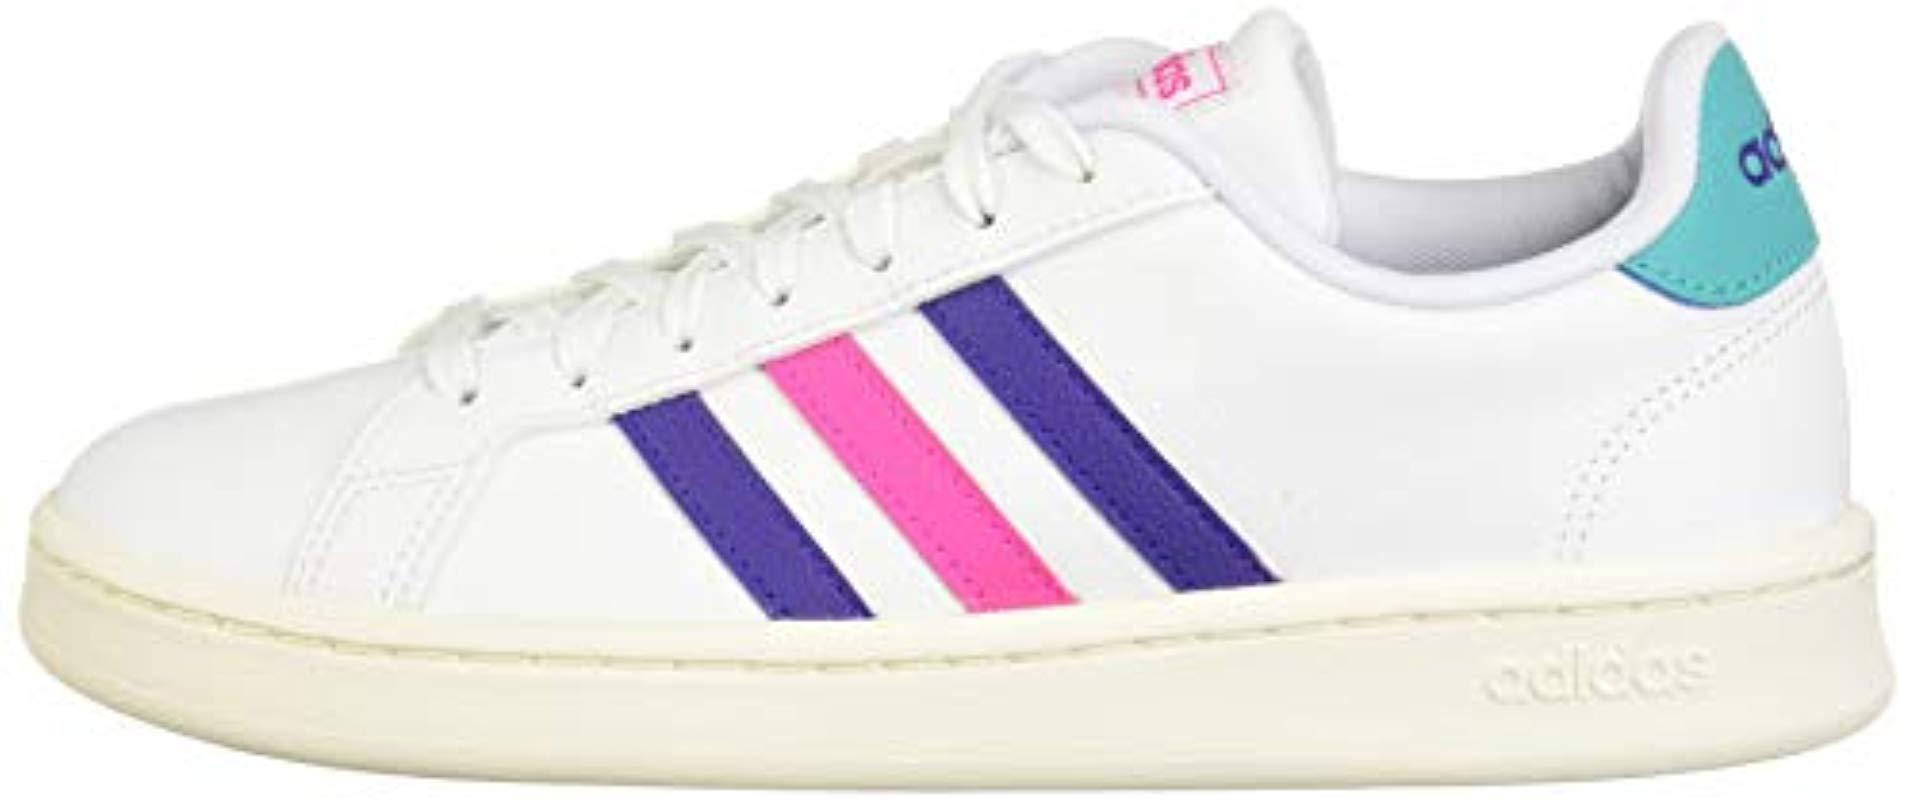 adidas women's grand court base suede tennis shoes